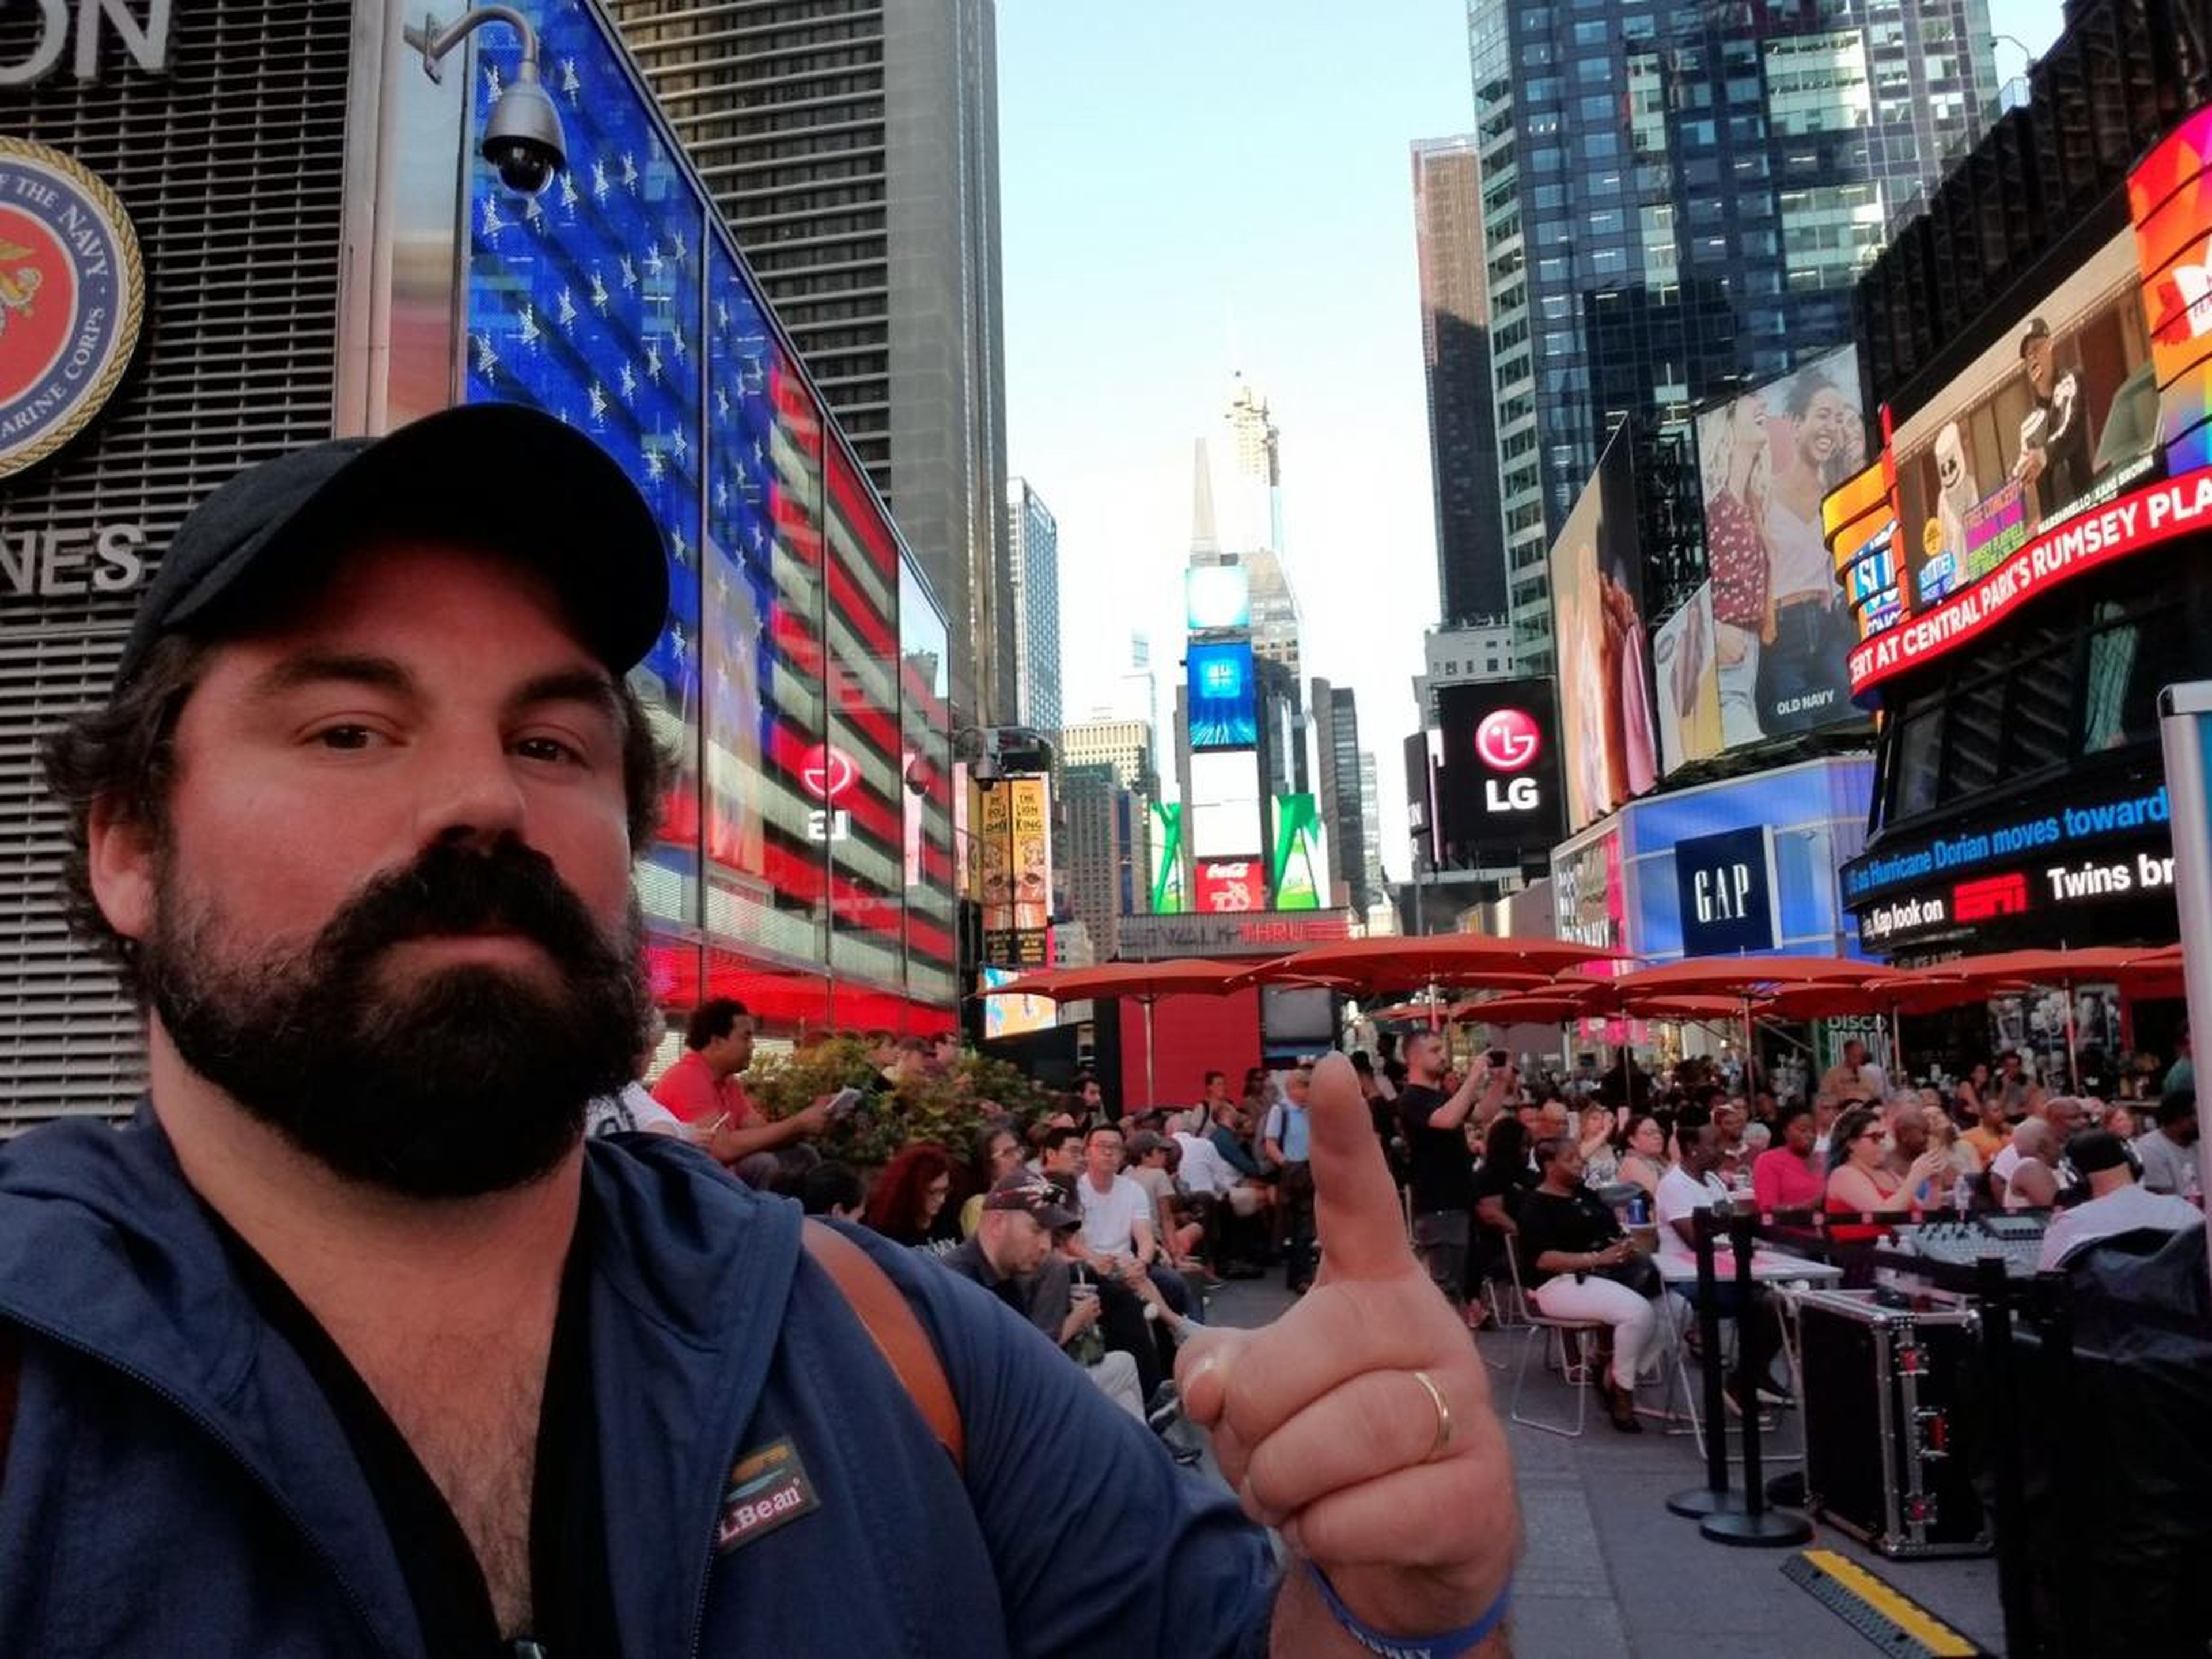 Fifteen minutes later, Sabatier sets off for a walk to Times Square on his way to dinner. "Sometimes I just love to walk 30 to 40 blocks through the city after a long day," he said. "It's the best city to walk in the world."